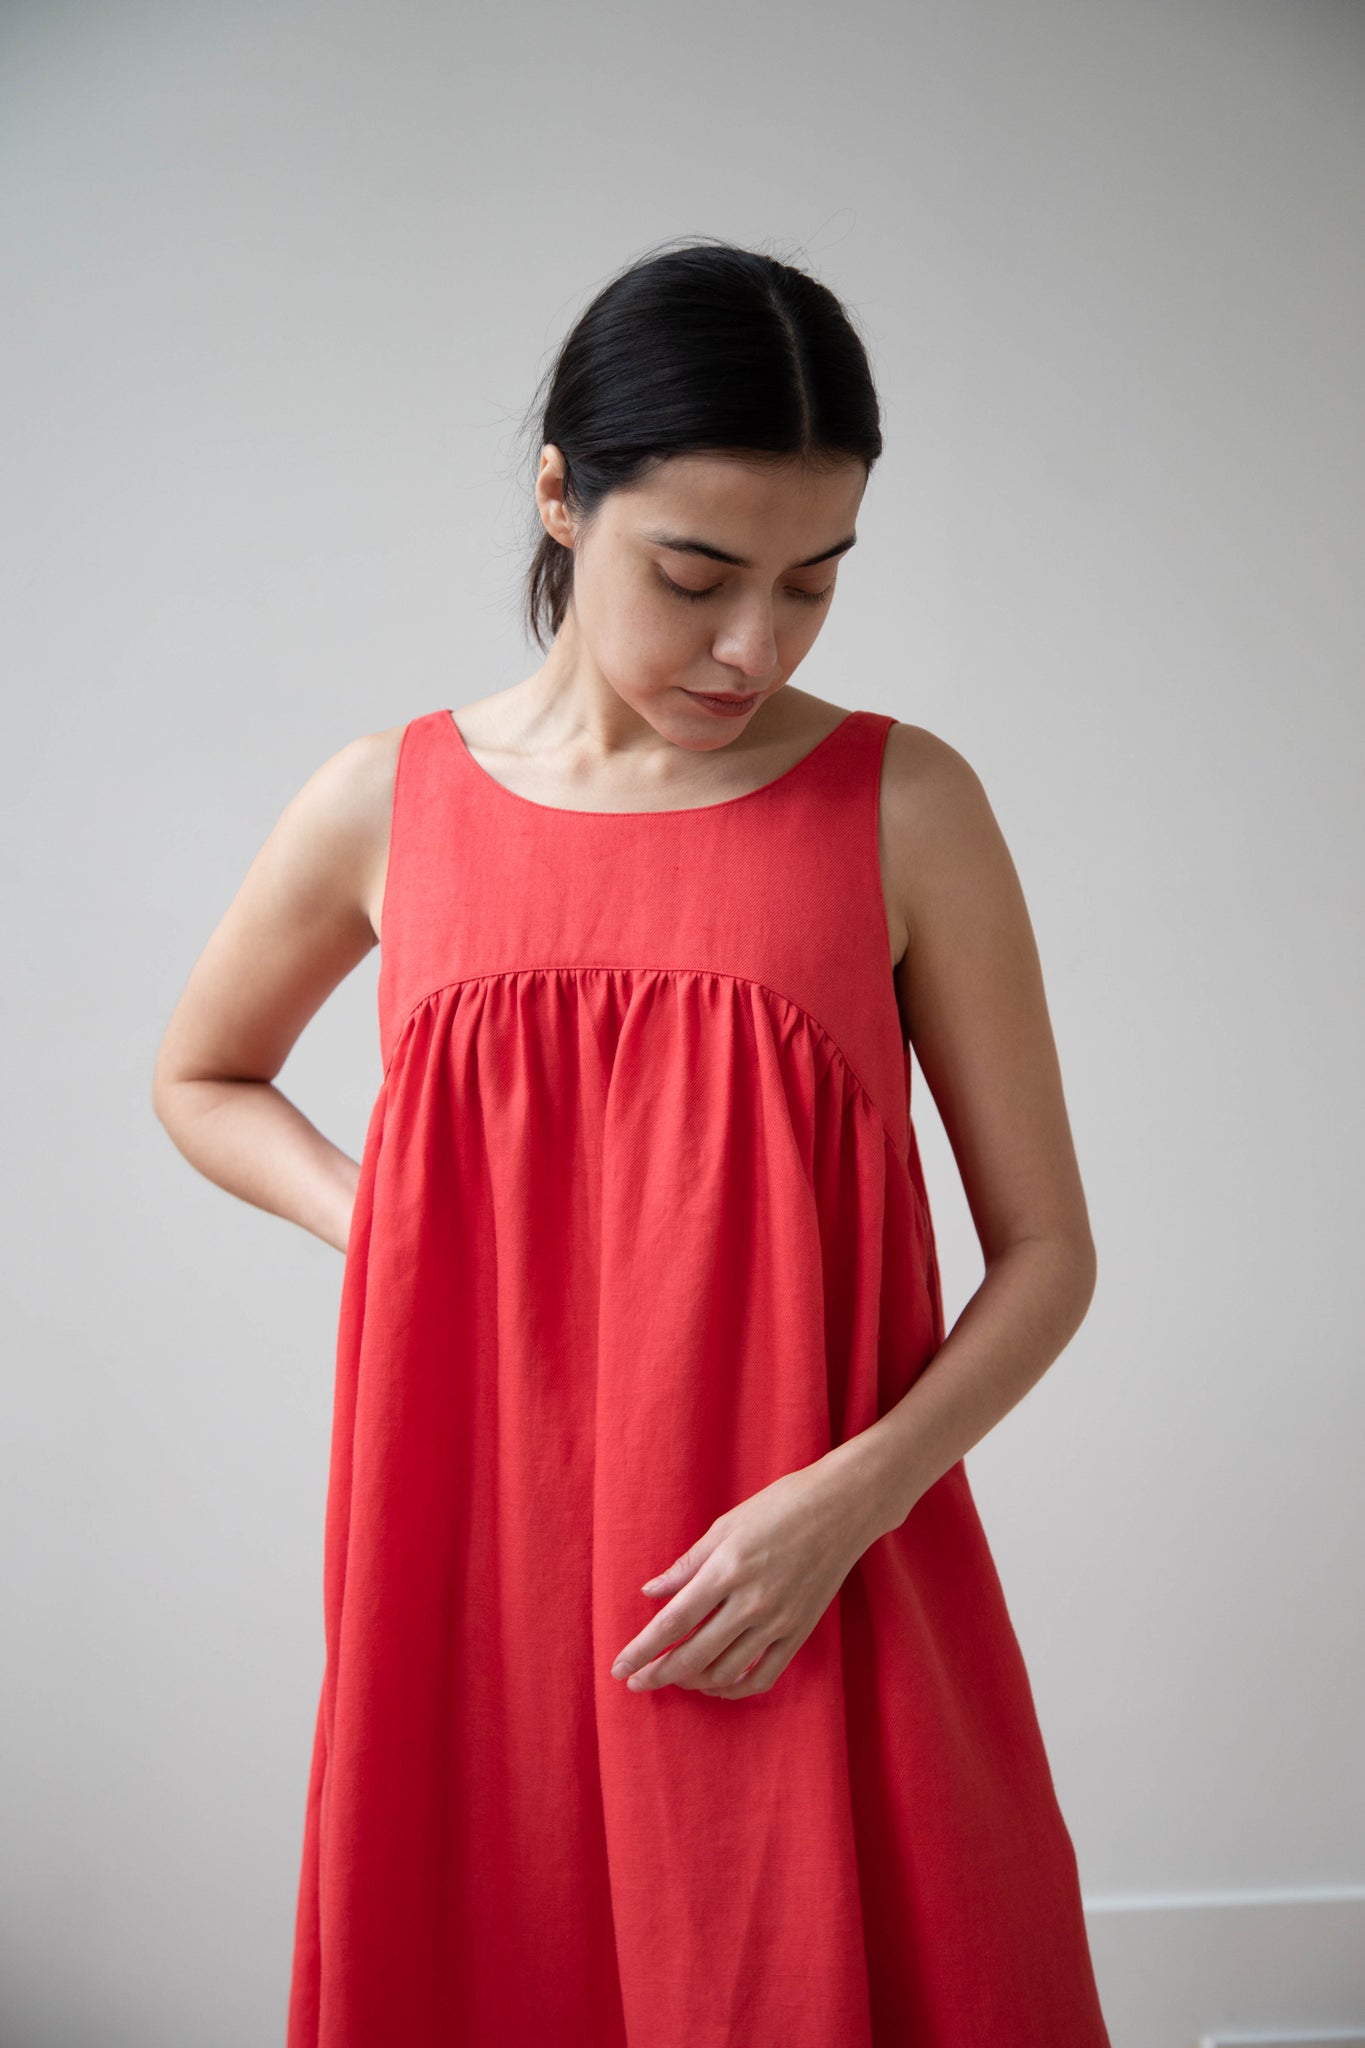 The Loom Linen Empire Dress in Red Linen